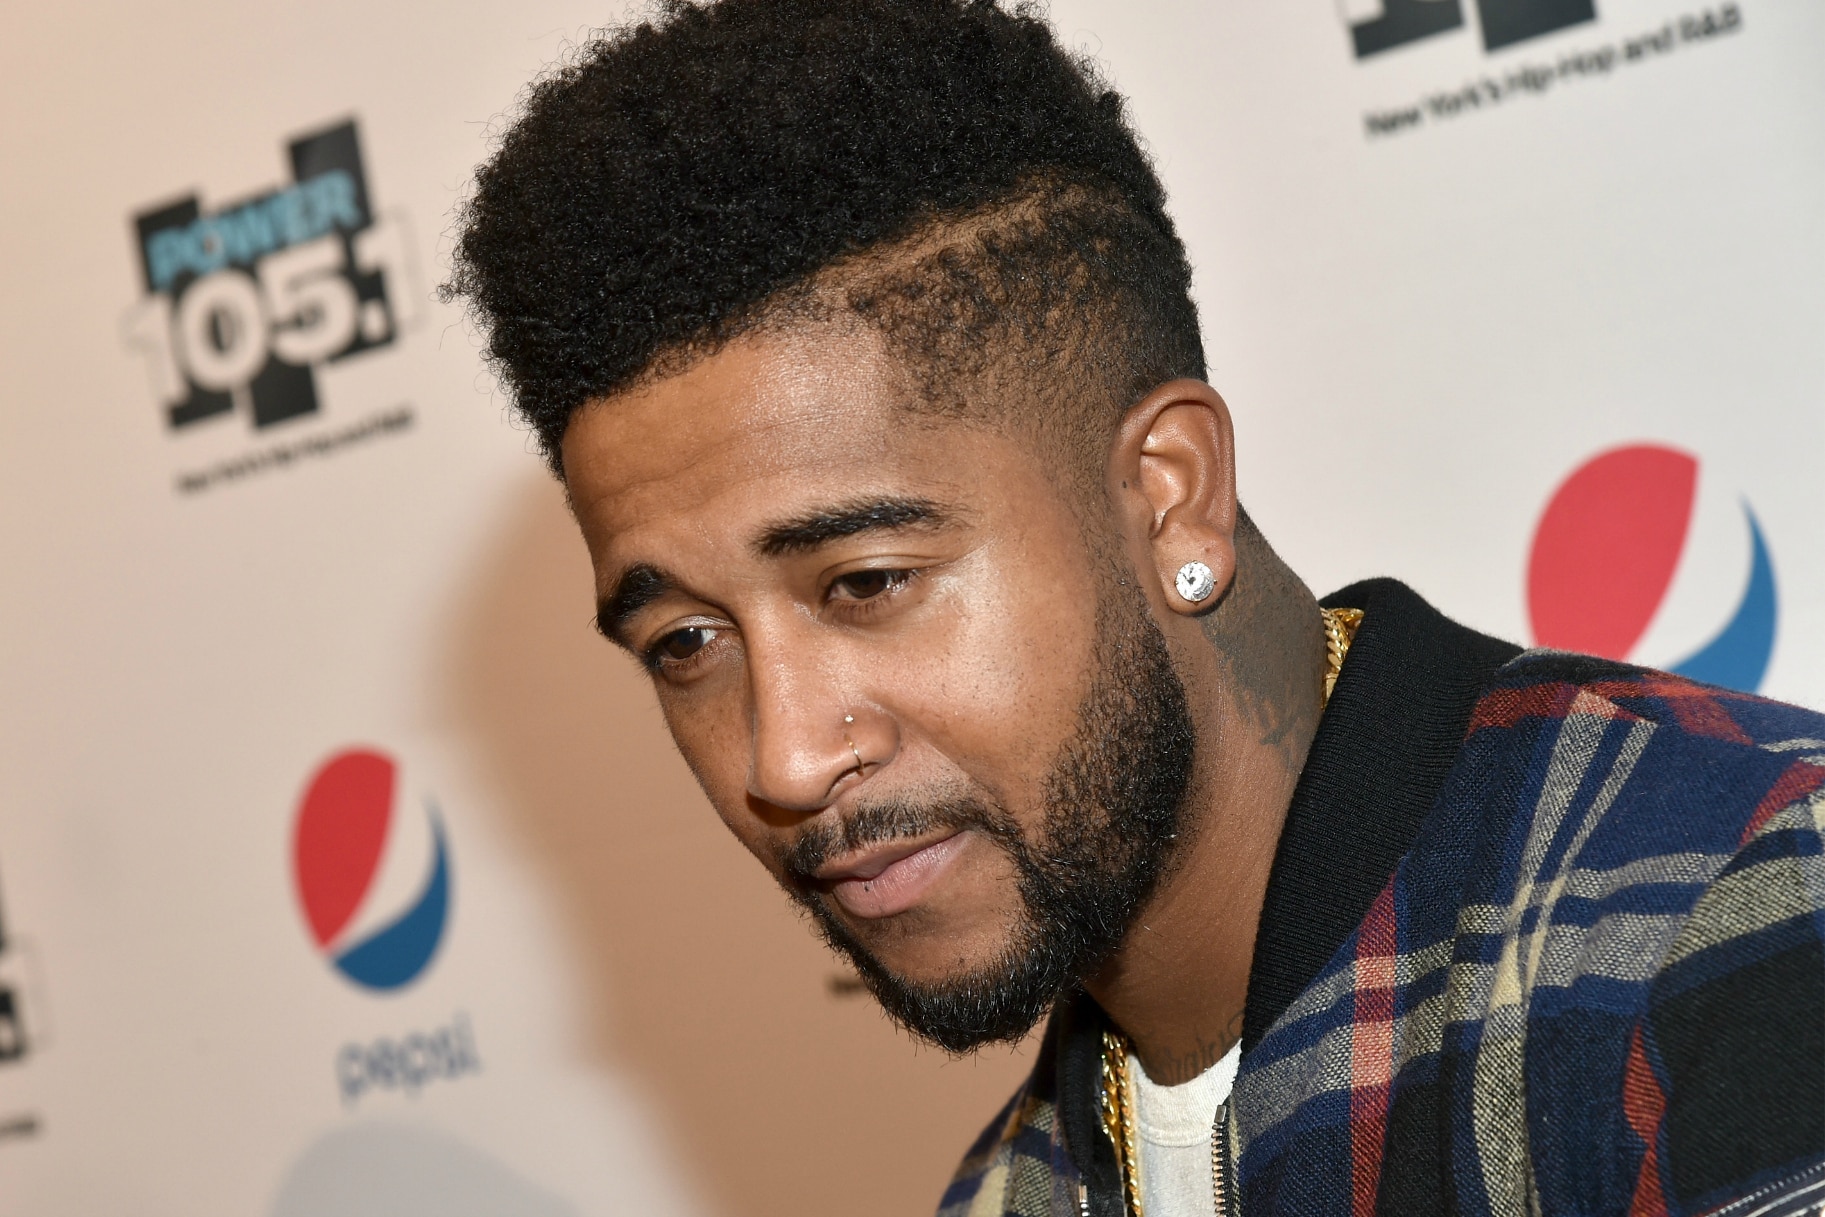 Omarion Just Went On A Crazy Twitter Rant About The 